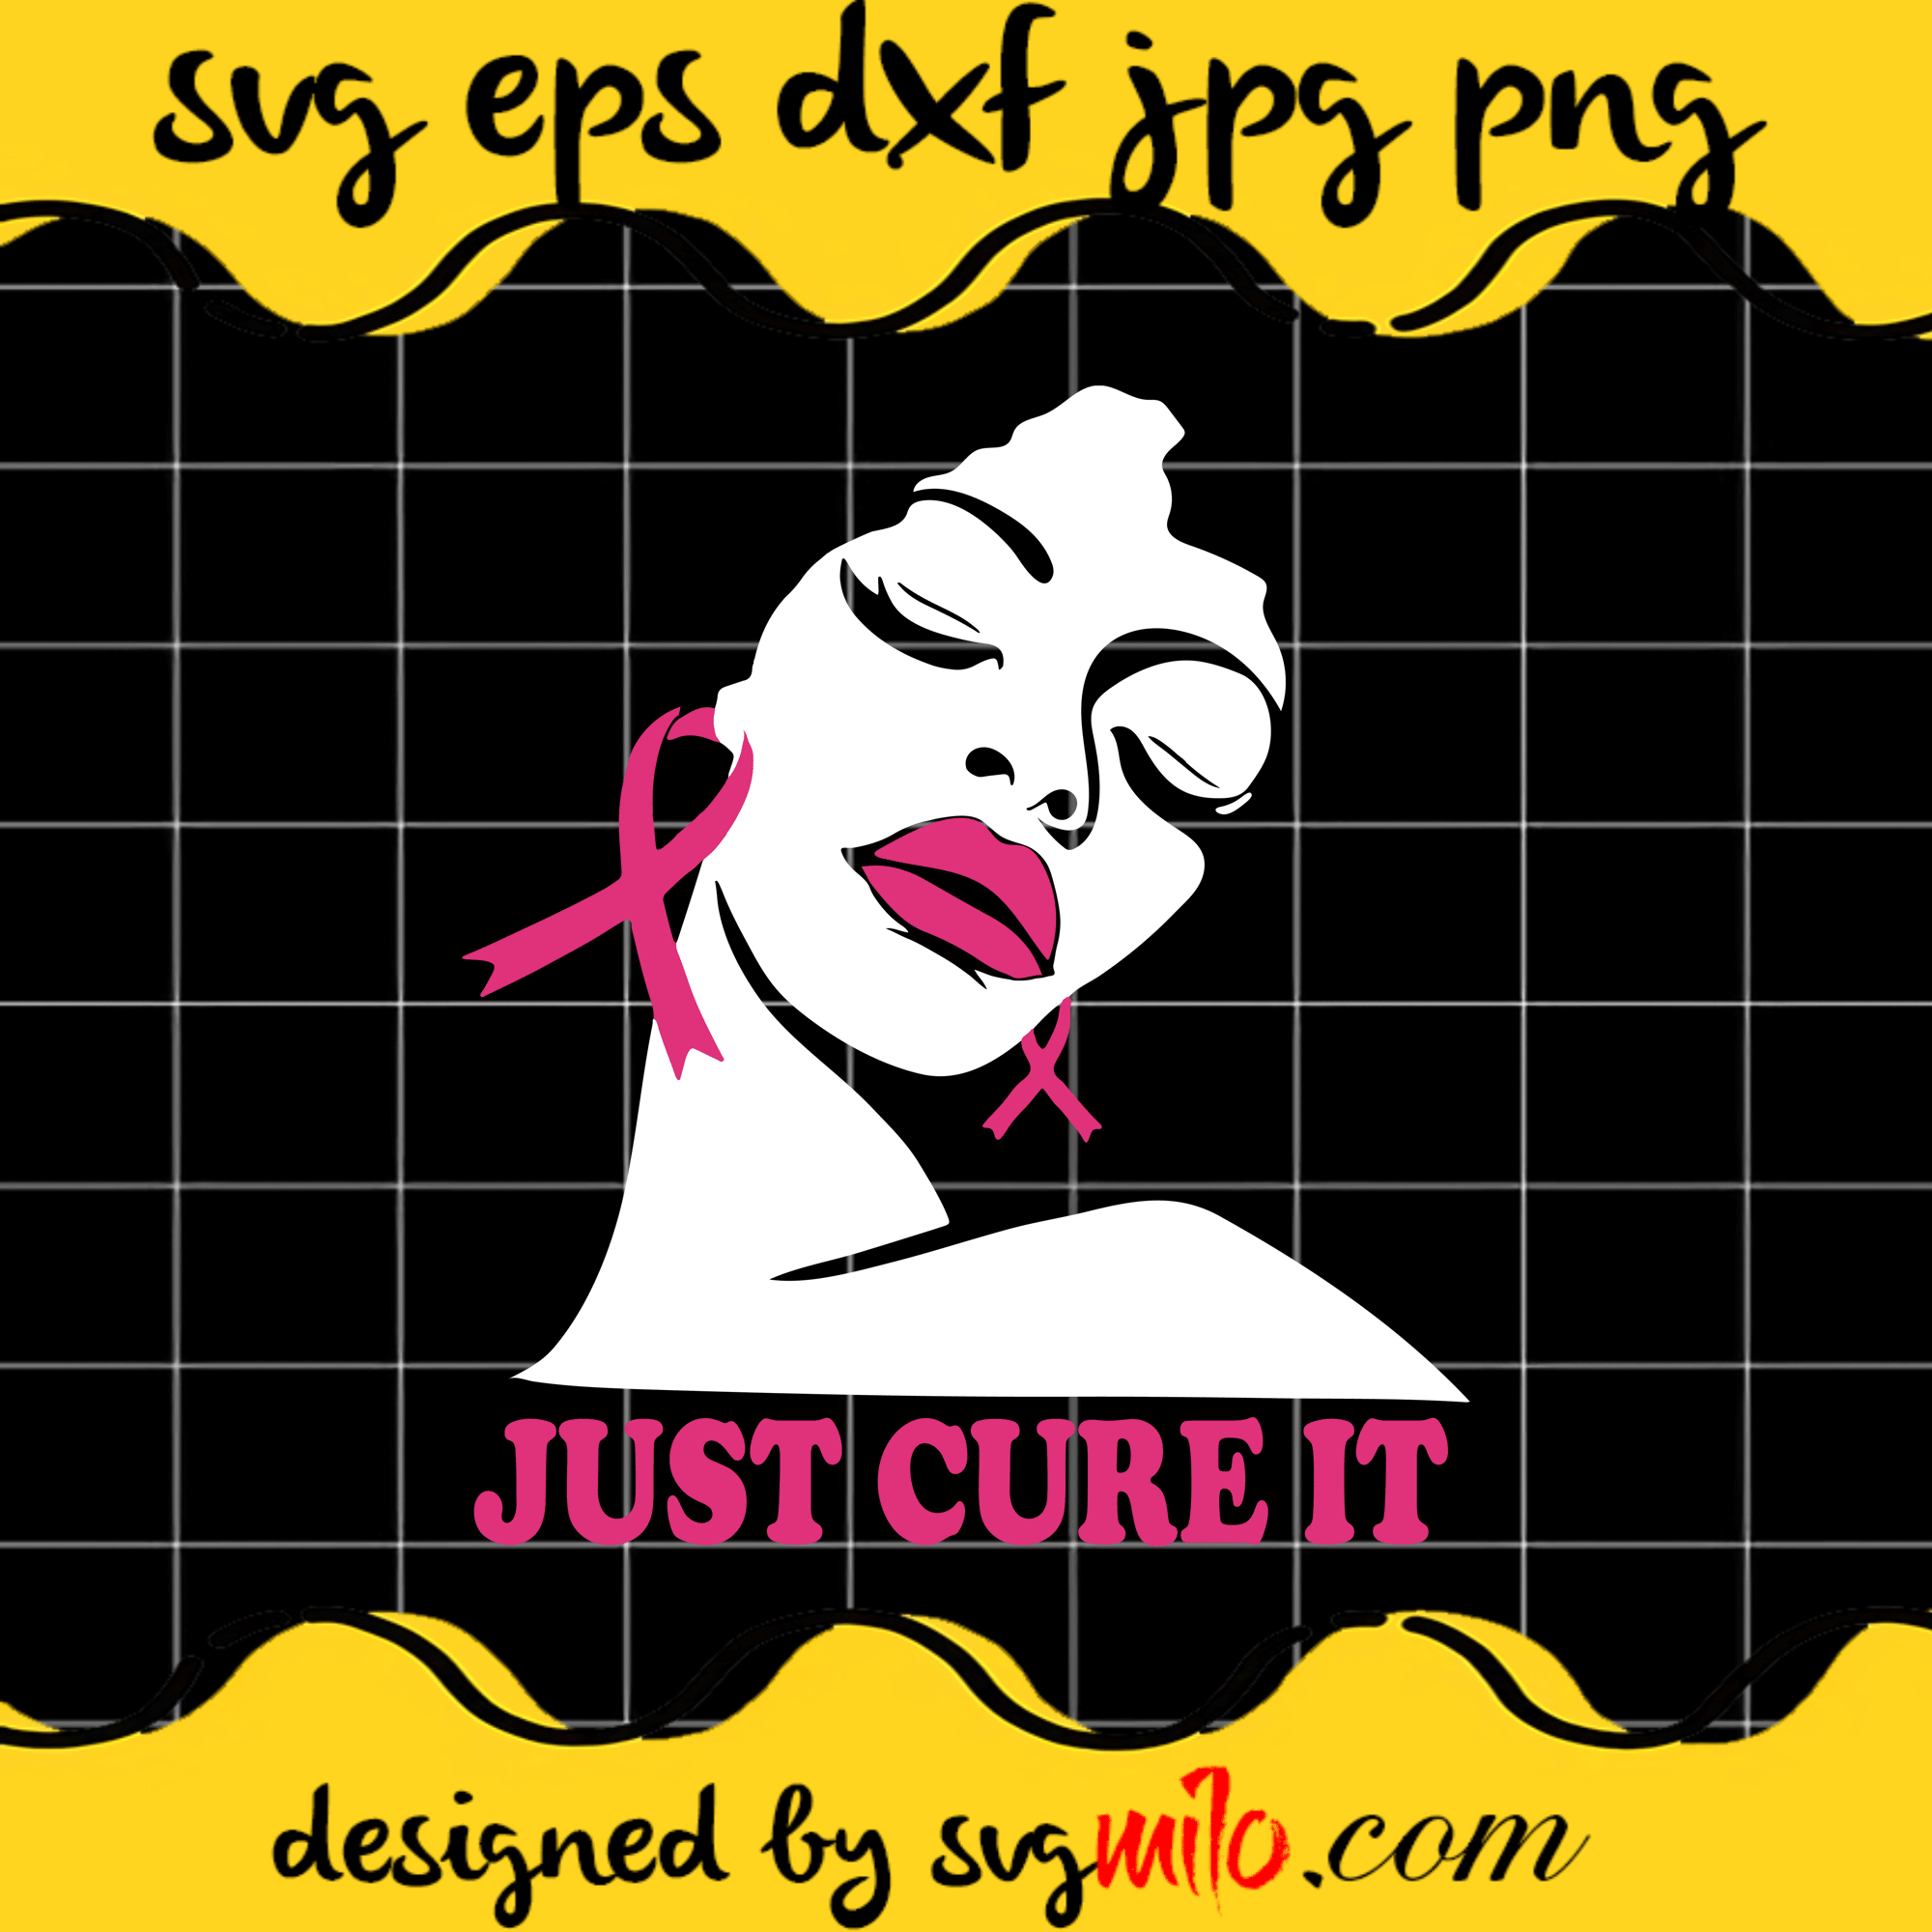 Just Cure It Afro Woman SVG, Breast Cancer SVG, EPS, PNG, DXF, Premium Quality - SVGMILO